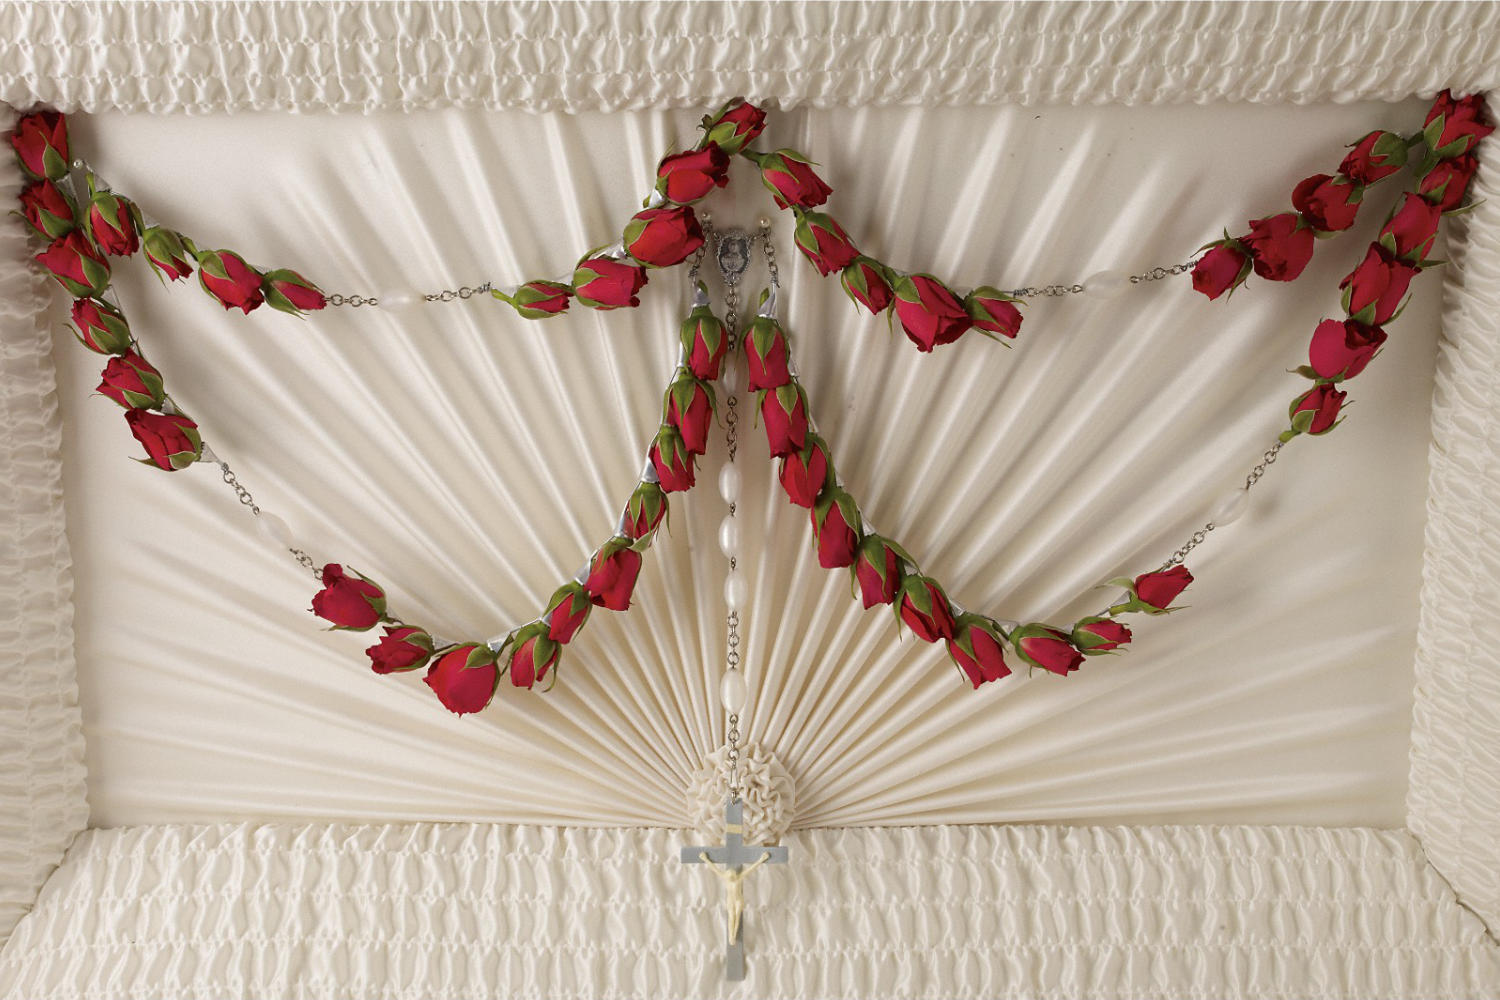 A rosary made of 50 red roses hanging from the inside side of a casket for a funeral set up